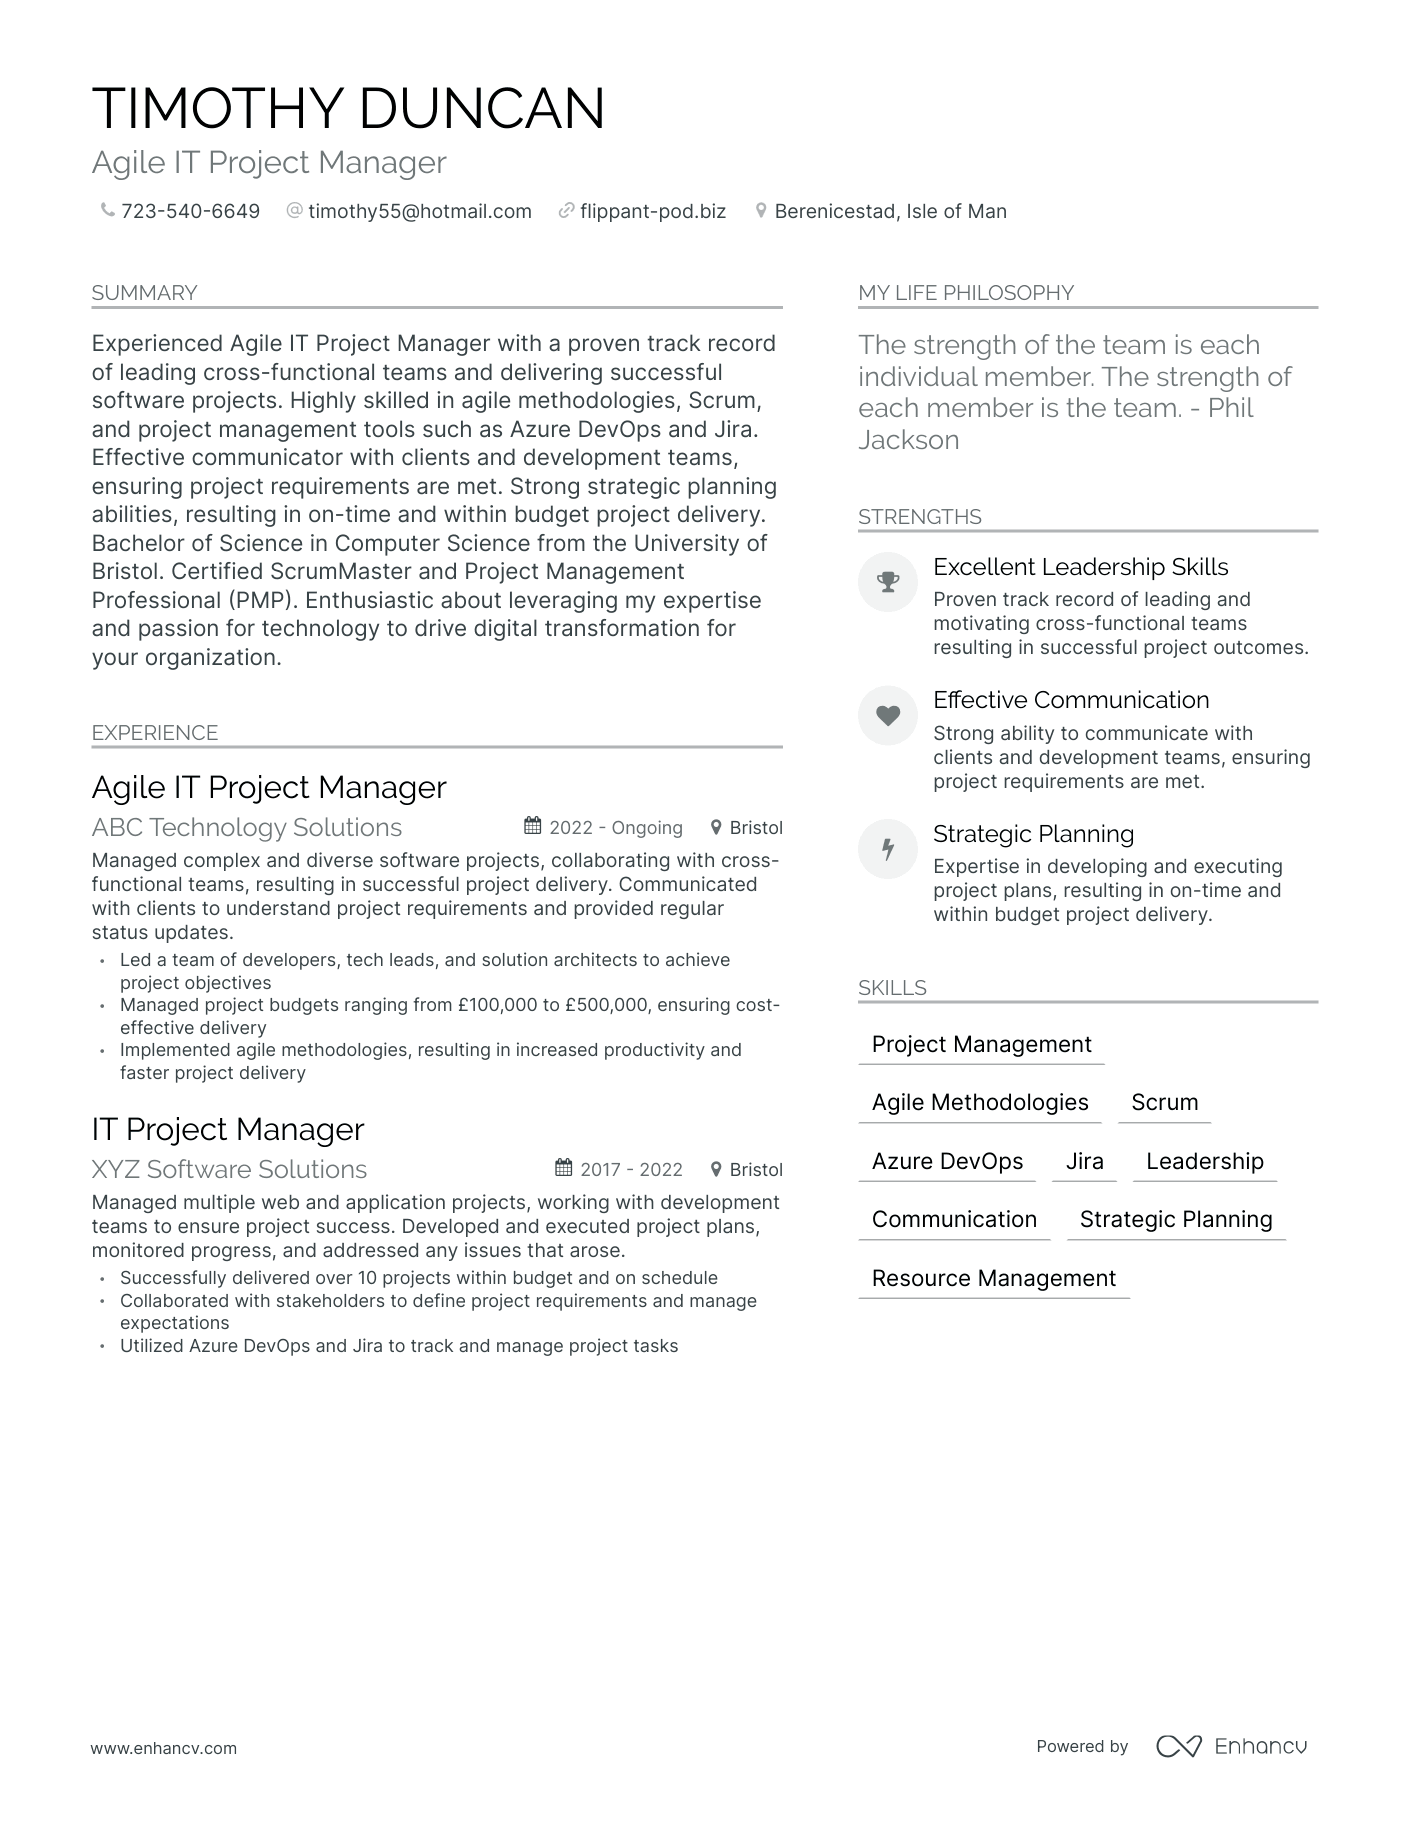 Agile IT Project Manager resume example